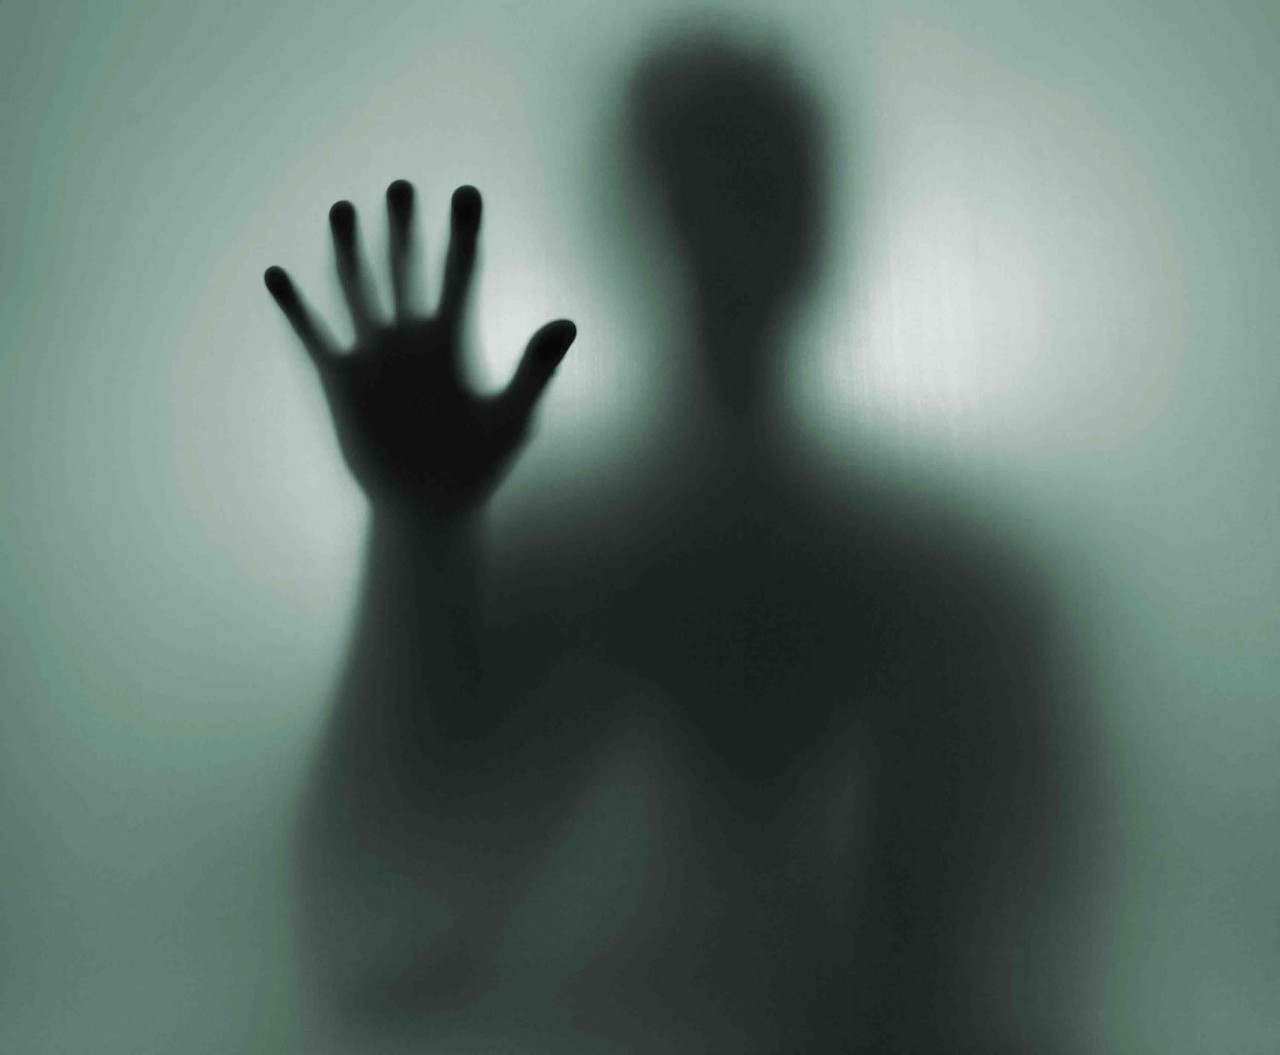 Mysteries of the Afterlife 
When: Sat., Oct. 29, 2-3 p.m. 
Phone: 330-467-8595 
Email: nordoniahills@akronlibrary.org
Join John Carroll University&#146;s Paranormal Research Group for an exploration of the world of the paranormal. After three years investigating paranormal phenomena, they will share stories, history, and evidence from locations around Ohio and the Midwest.
(Nordonia Hills Public Library)